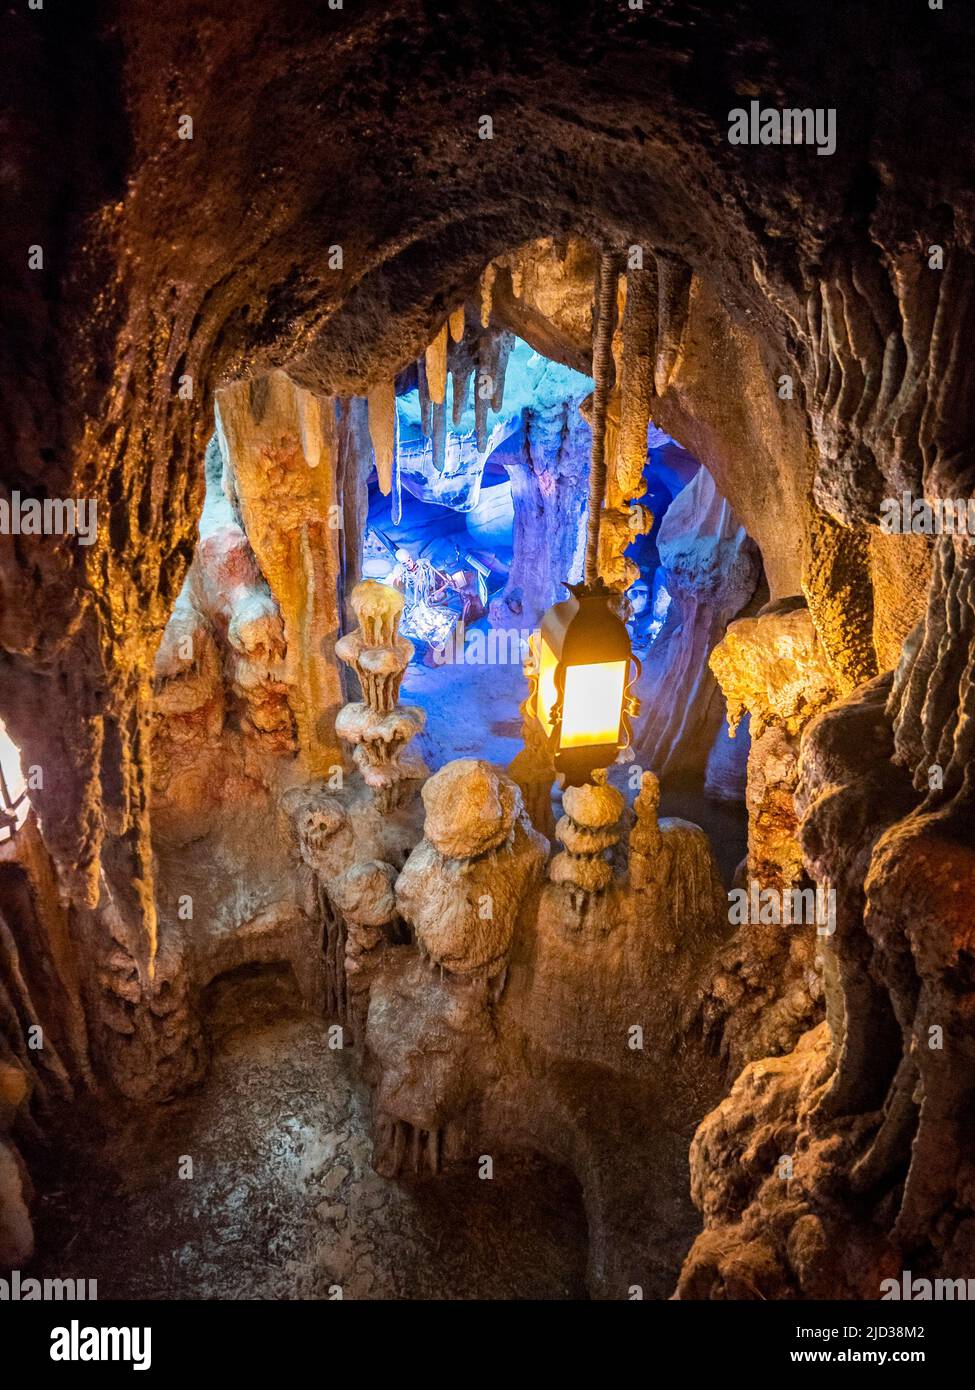 Paris, France - 04/05/2022: Cave scene of rides and places of Disneyland Paris. Very successful designs from movie moments. Stock Photo